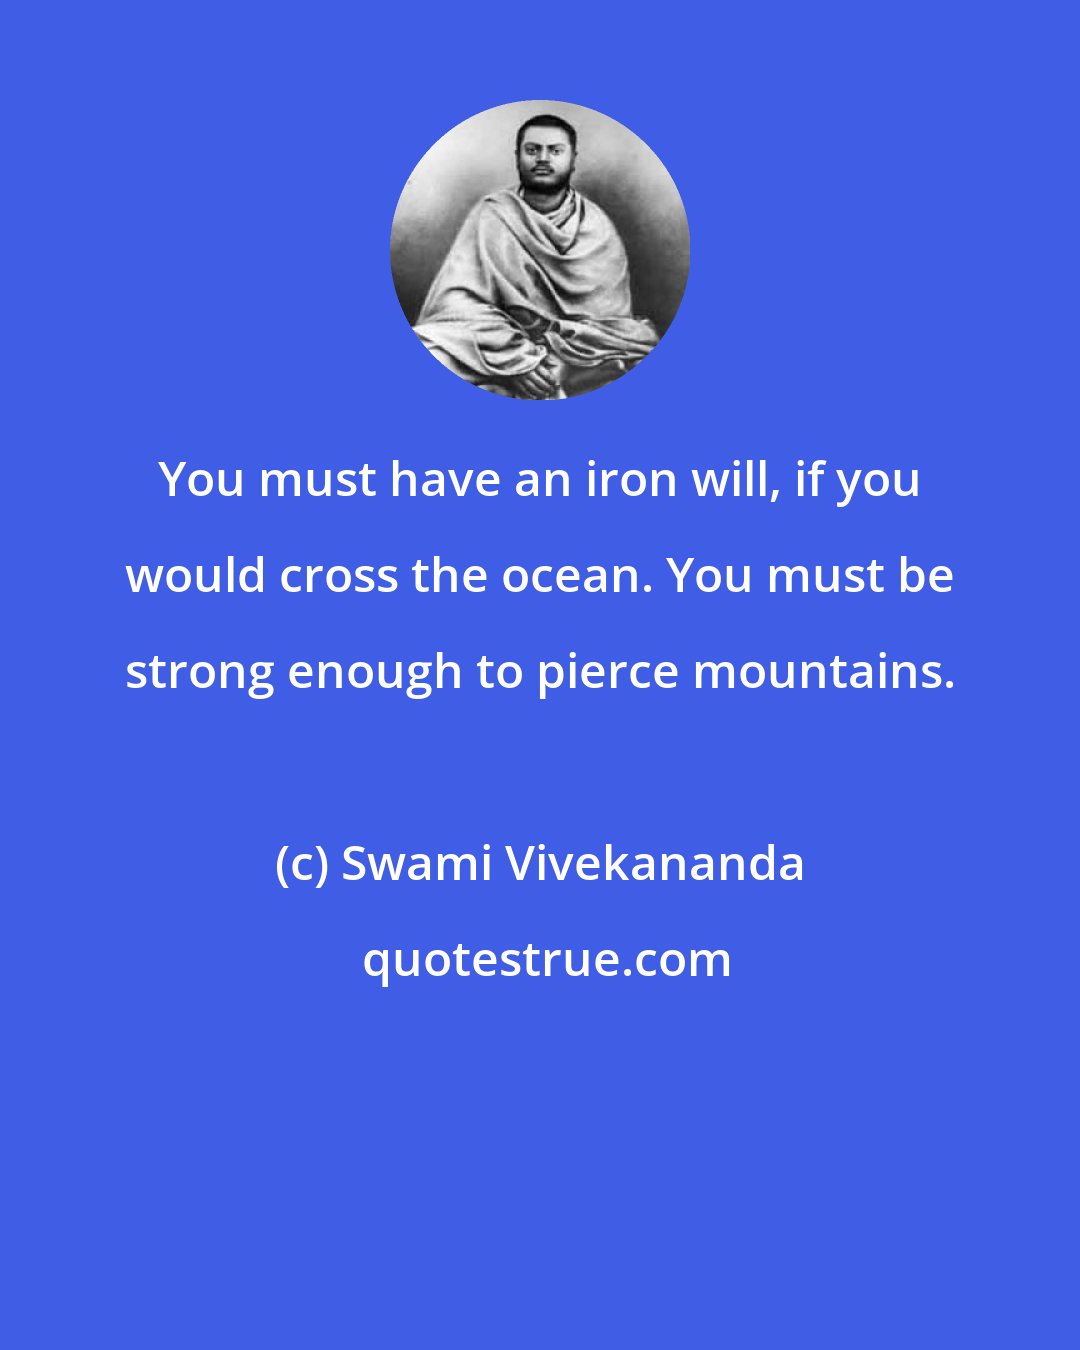 Swami Vivekananda: You must have an iron will, if you would cross the ocean. You must be strong enough to pierce mountains.